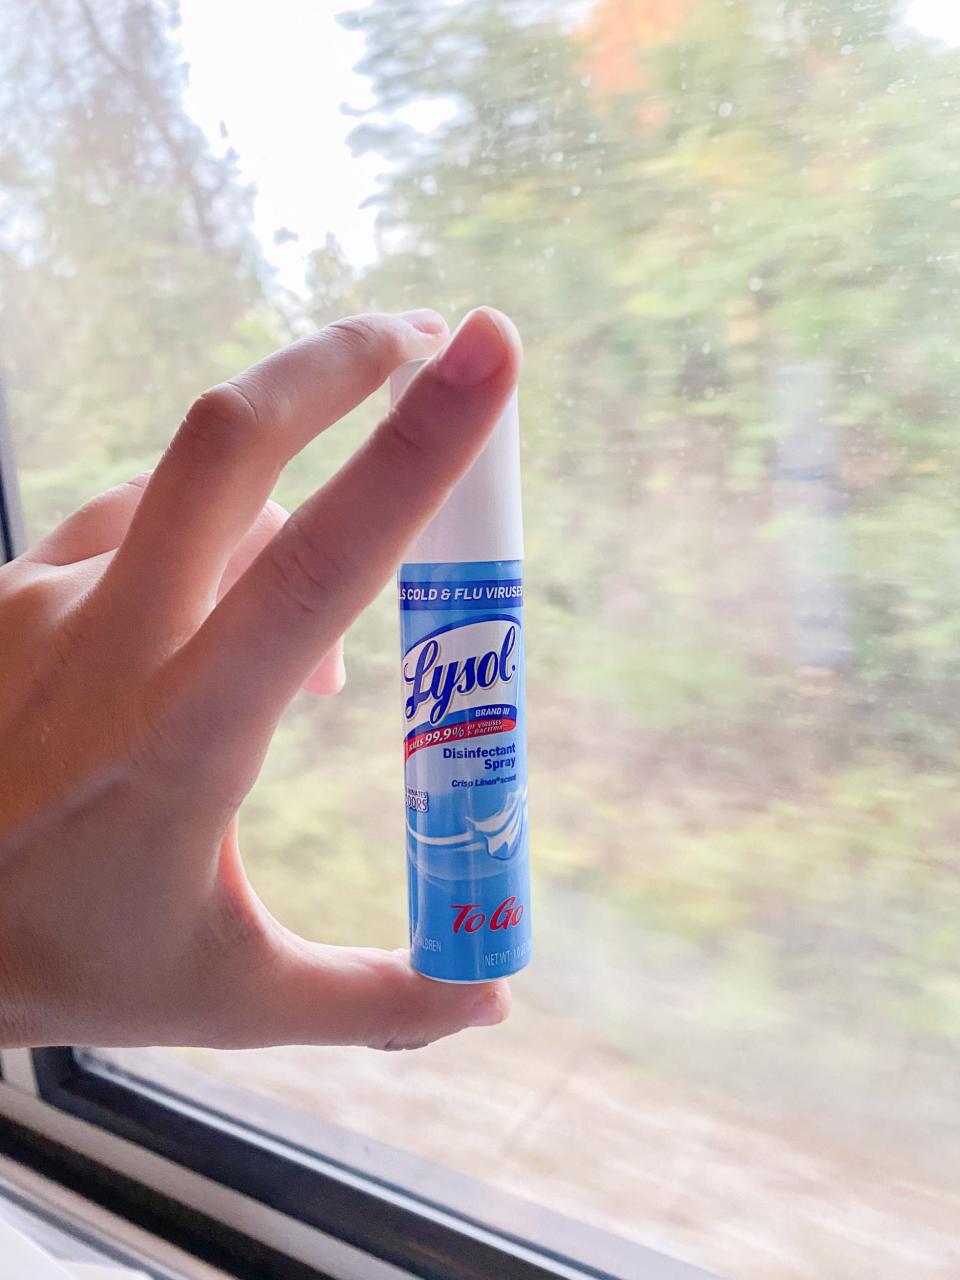 The author holds up lysol disinfectant in front of the train window